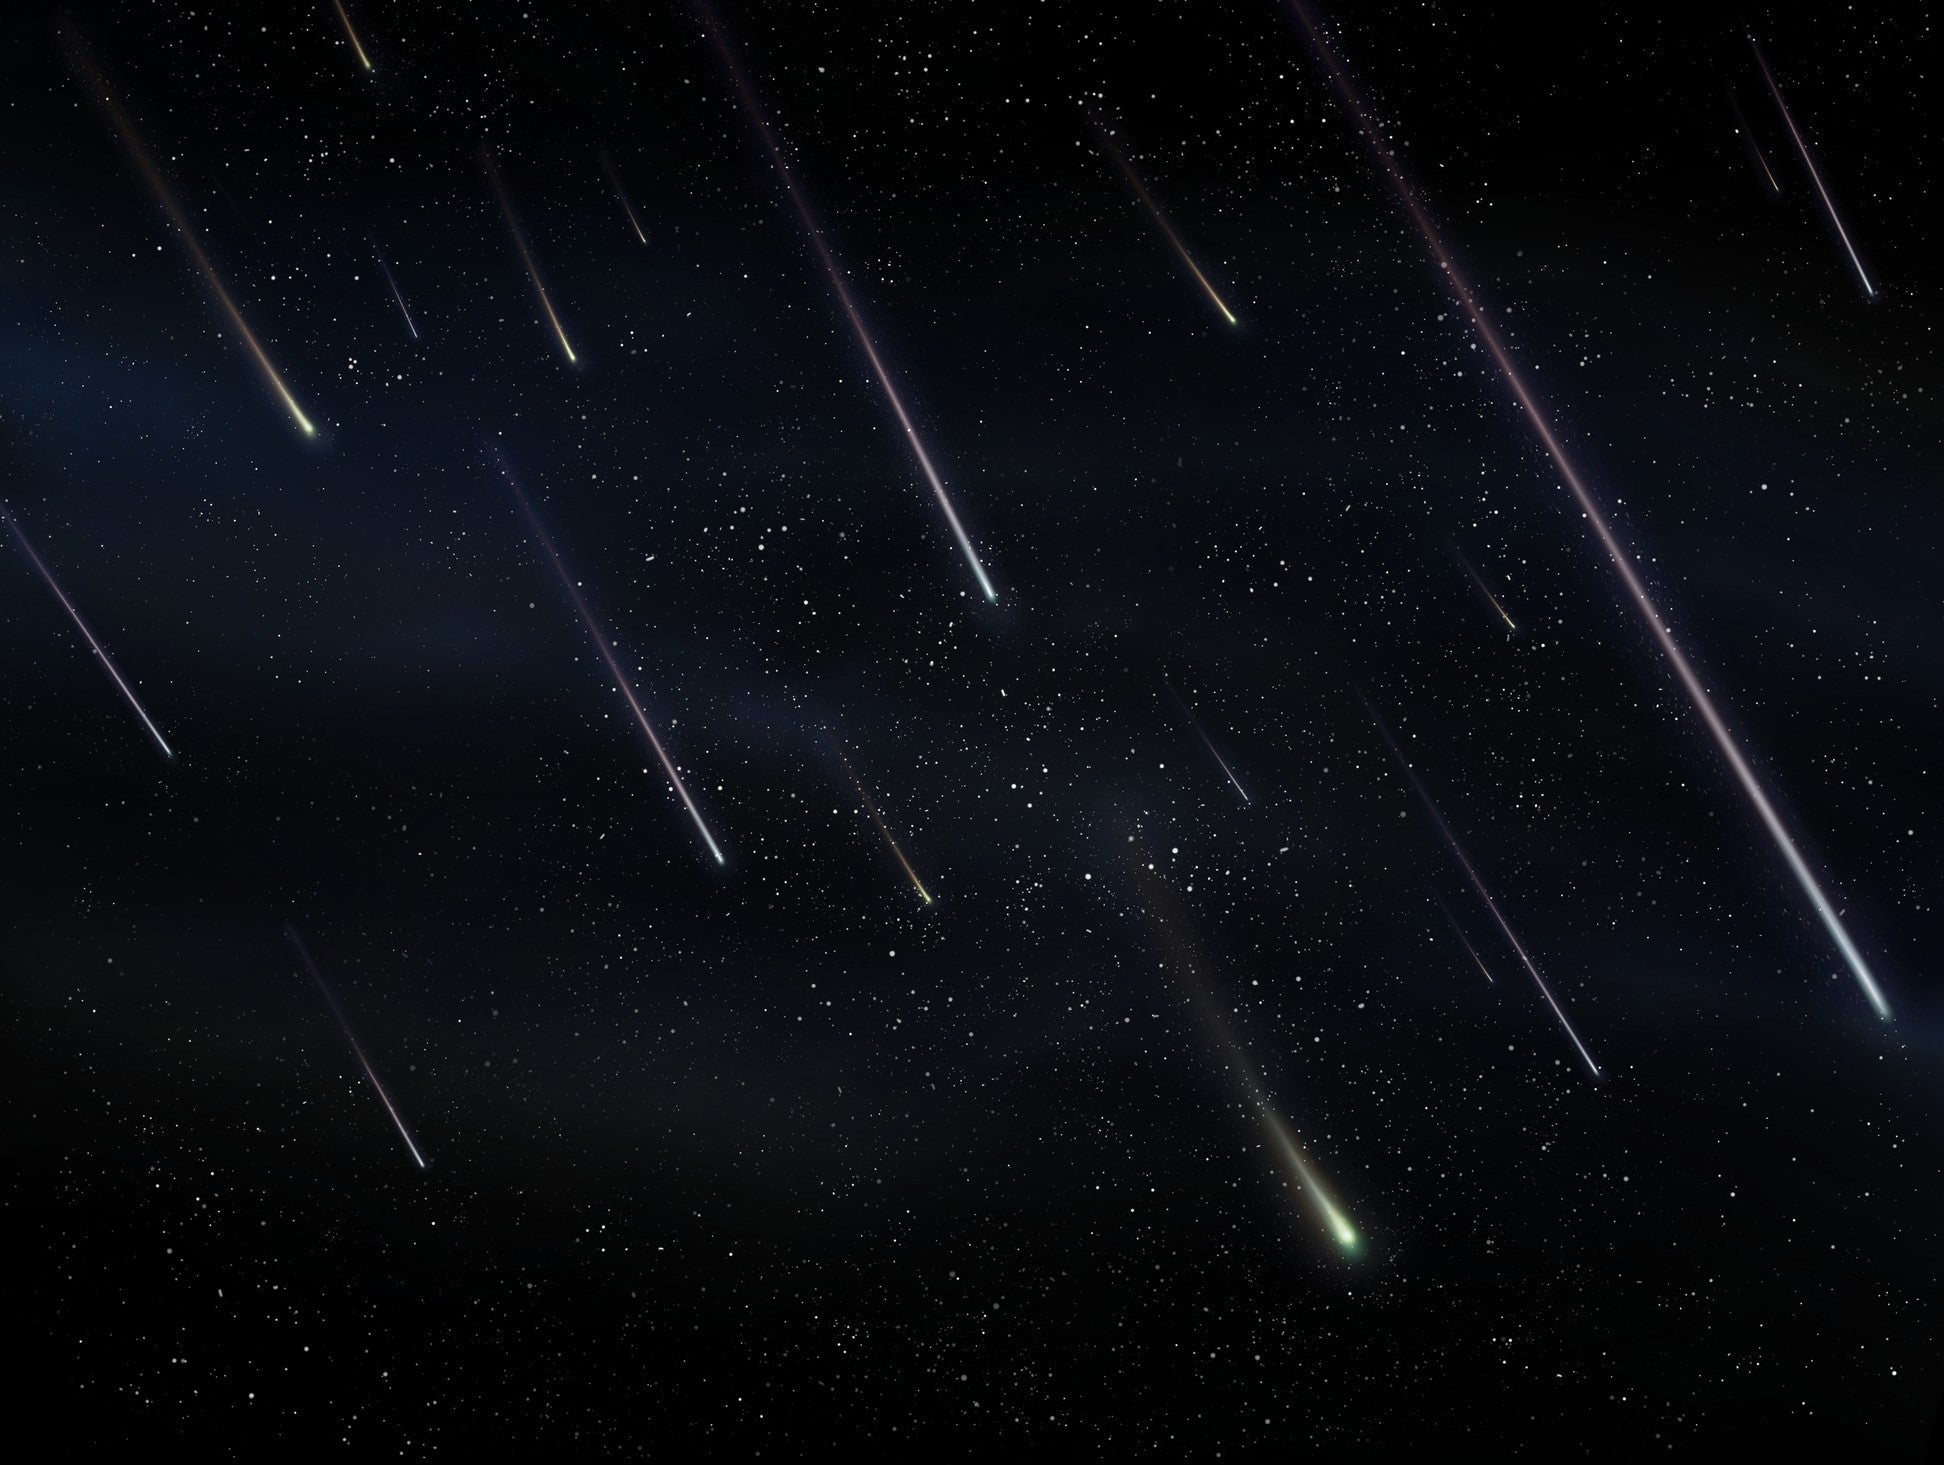 Quadrantids meteor shower tonight Dozens of spectacular shooting stars on display across night sky The Independent